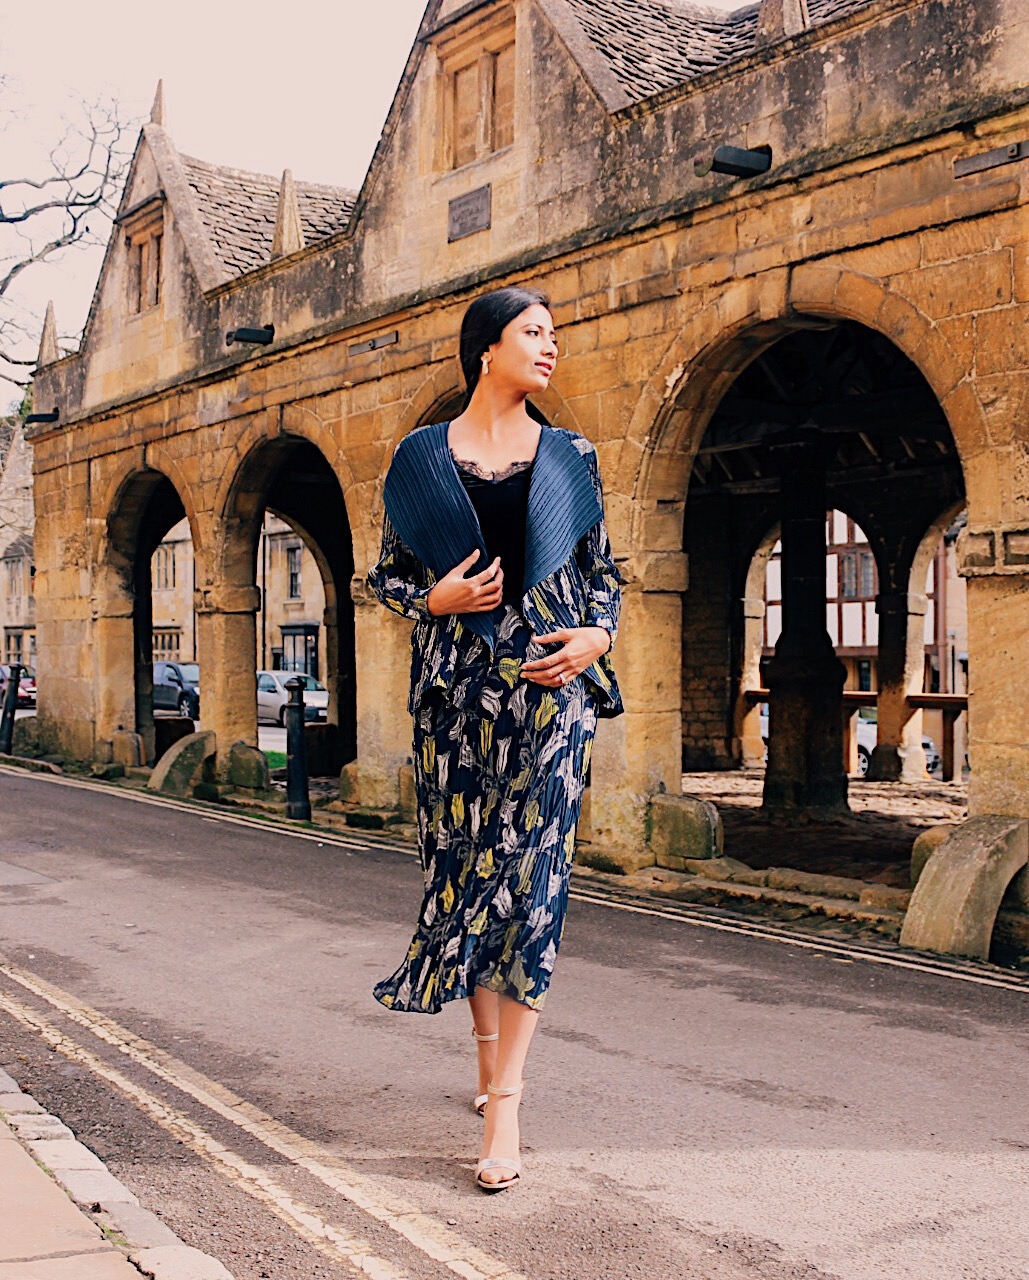 cotswolds, english countryside, what to wear to cotswolds, wear in cotswolds, wear in countryside, tulip print, matching set, coord skirt, matching skirt set, ss17, east, east review, east clothing, east uk, east matching set, jacket and skirt set, effortless, chic outfit, wear in spring in england, england spring outfit, wear in the uk, wear in the uk in spring, feminine outfit, effortless feminine chic, european style, wear in europe, english, british, top indian blog, indian travel blog, indian luxury blog, indian fashion blogger, delhi blogger, delhi travel blogger, uk blog, london style, shades of blue, spring florals, spring outfit 2017, elegant spring outfit